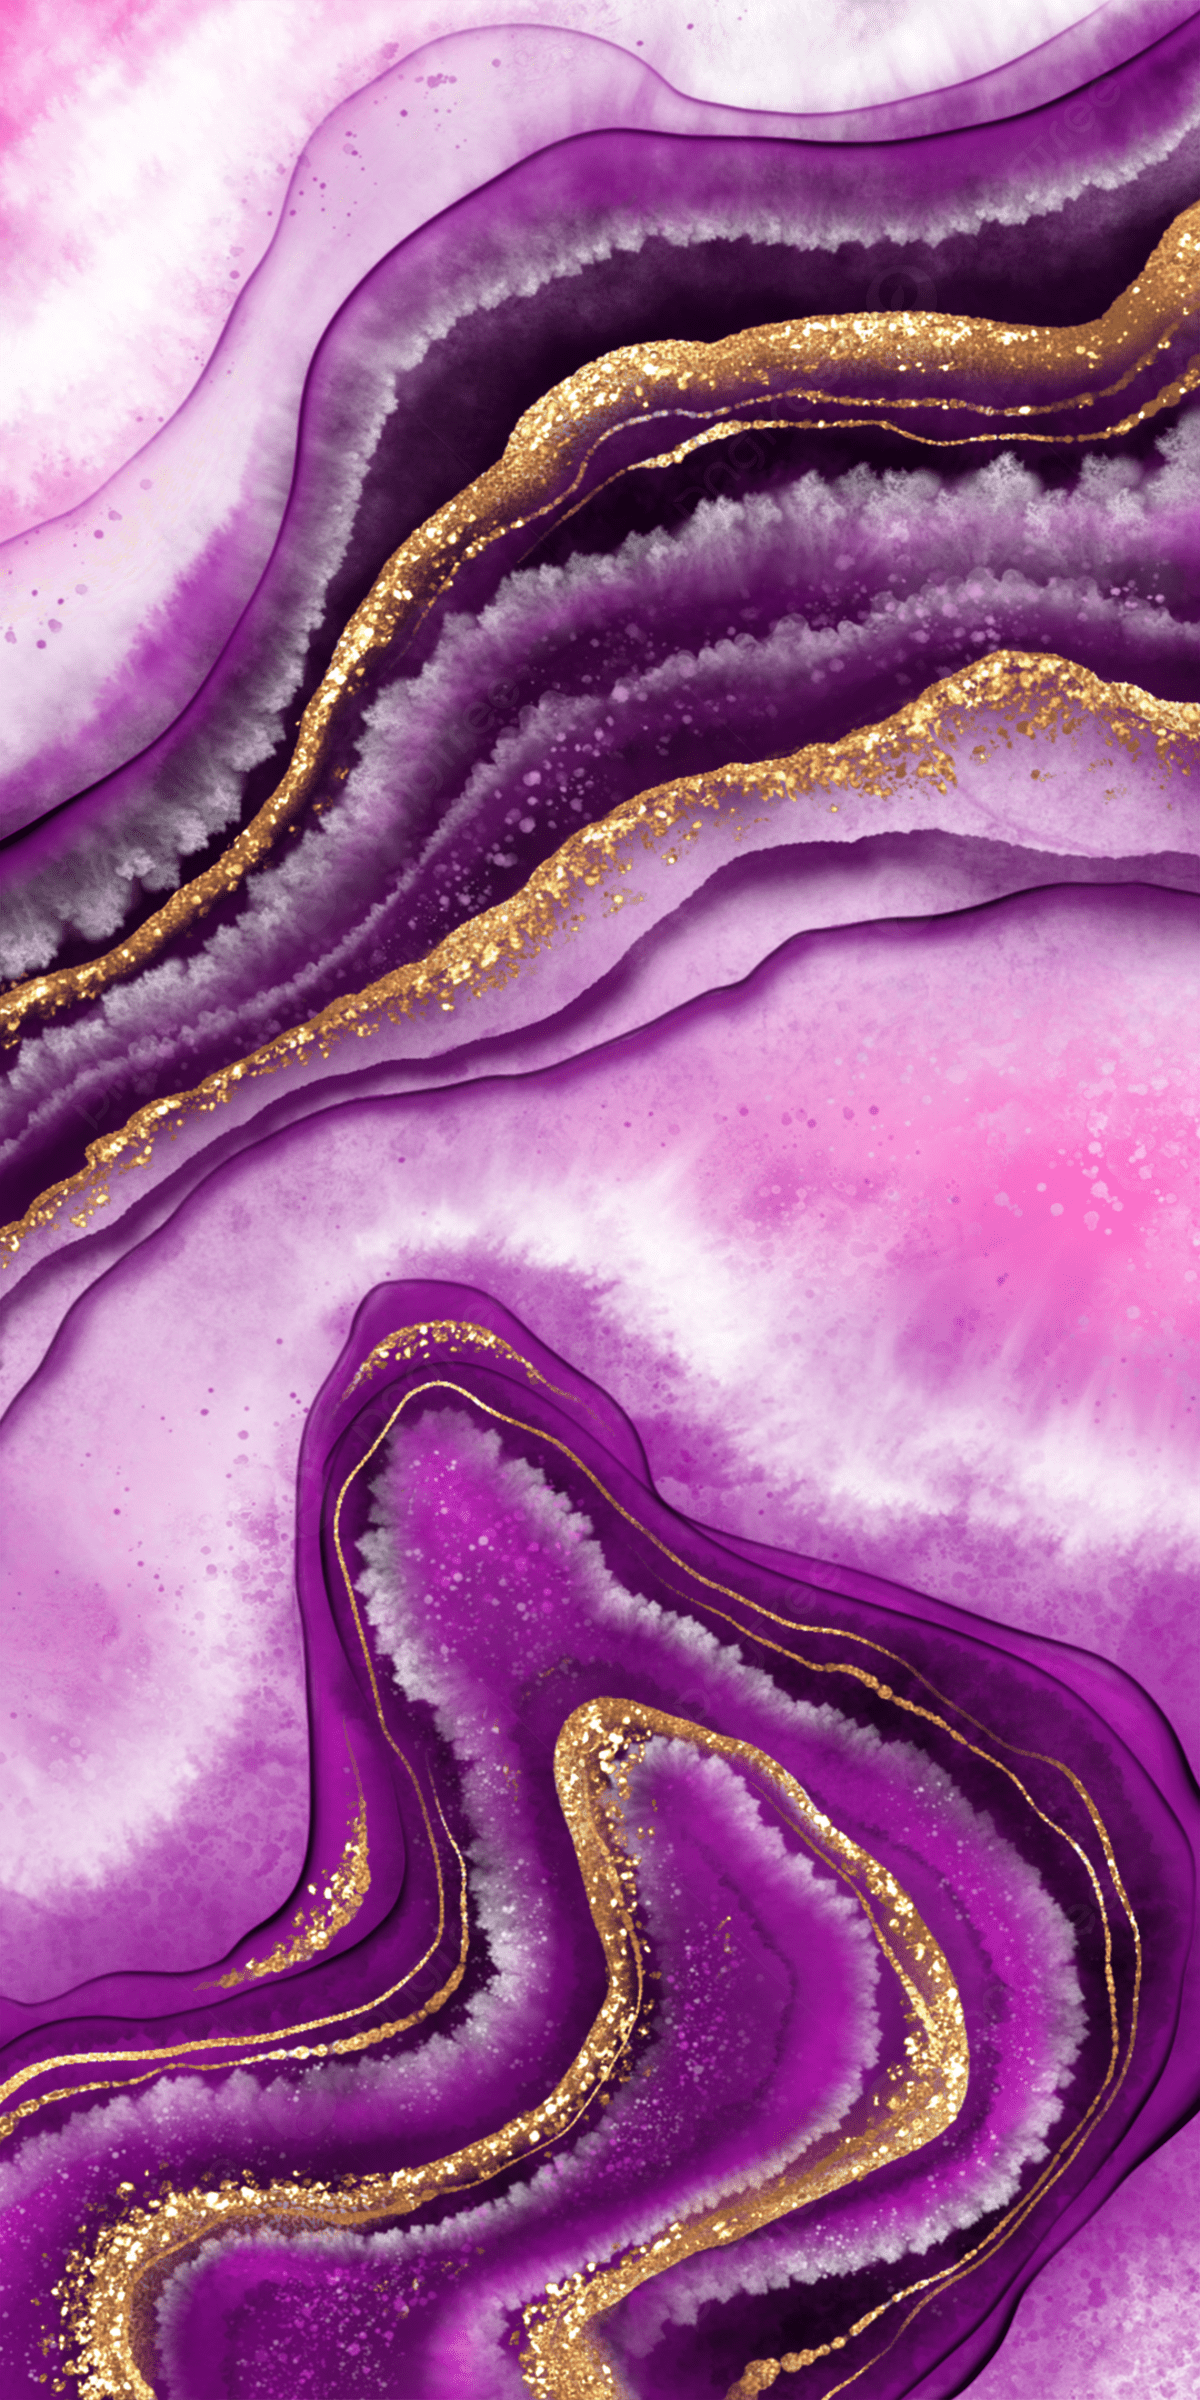 A marbleized purple and pink painting with gold accents - Marble